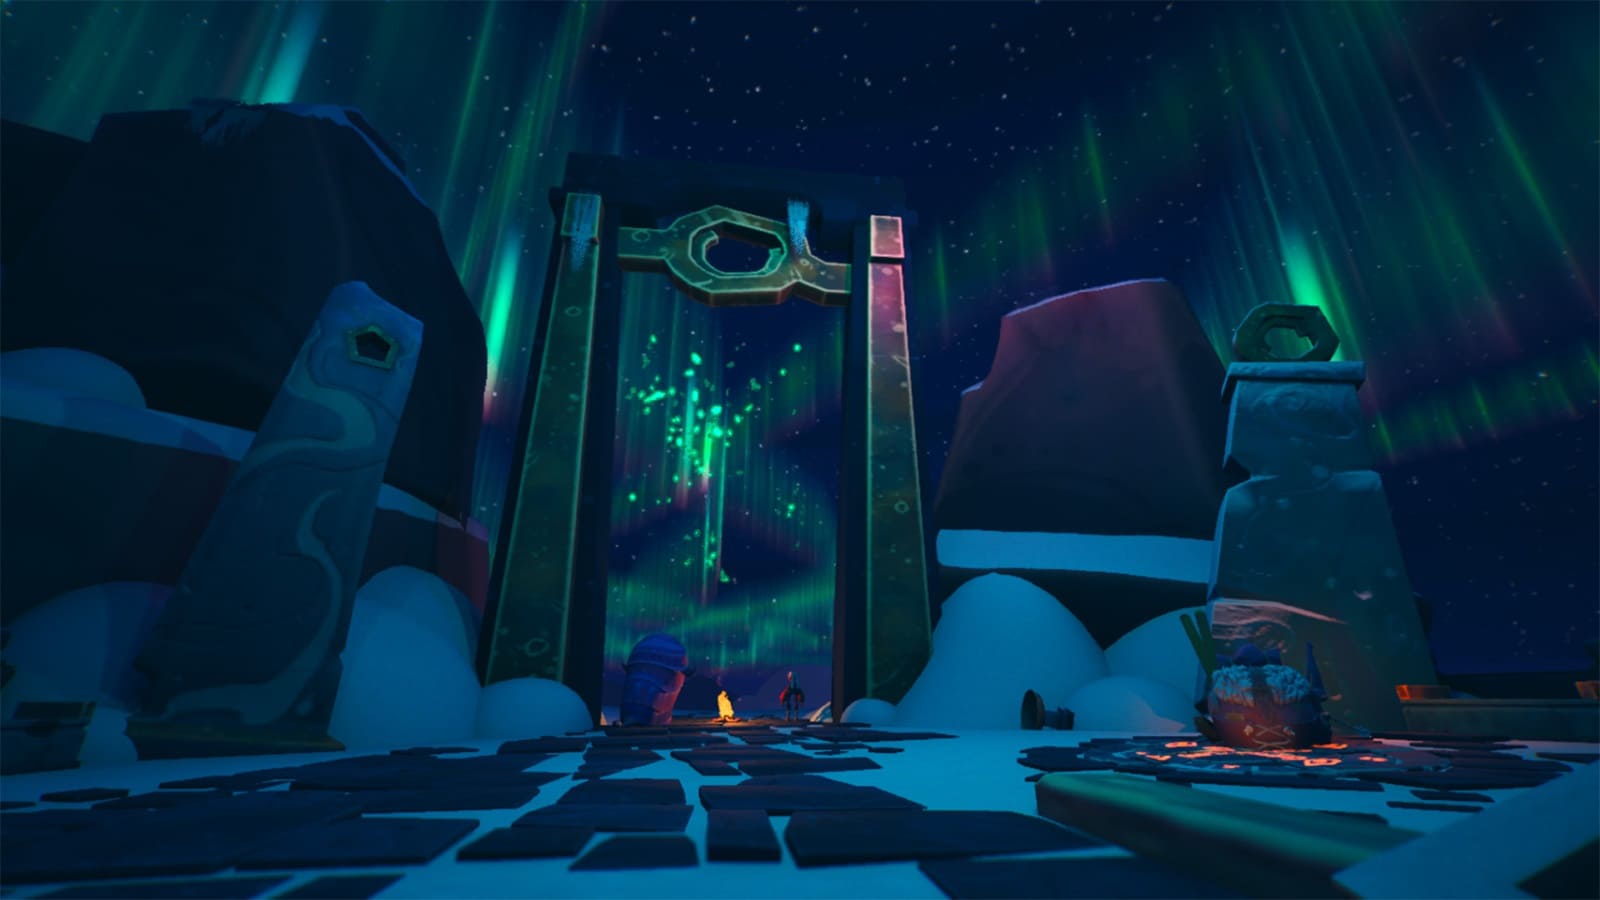 A far view of the character across a door with the northern lights visible on the sky